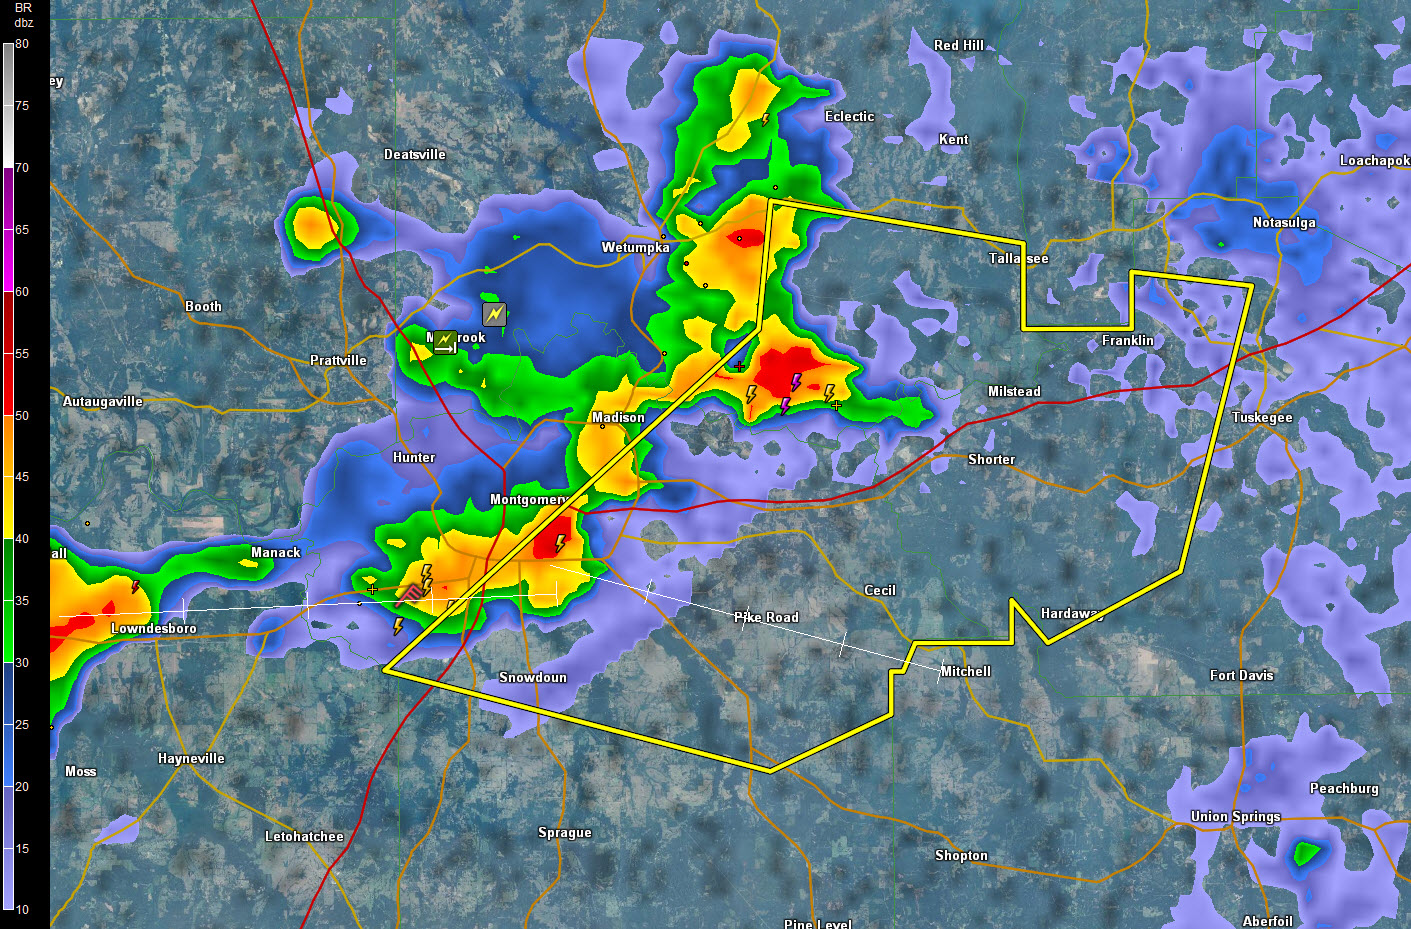 Severe Thunderstorm Warning for Central Montgomery, W Macon & SE Elmore Counties